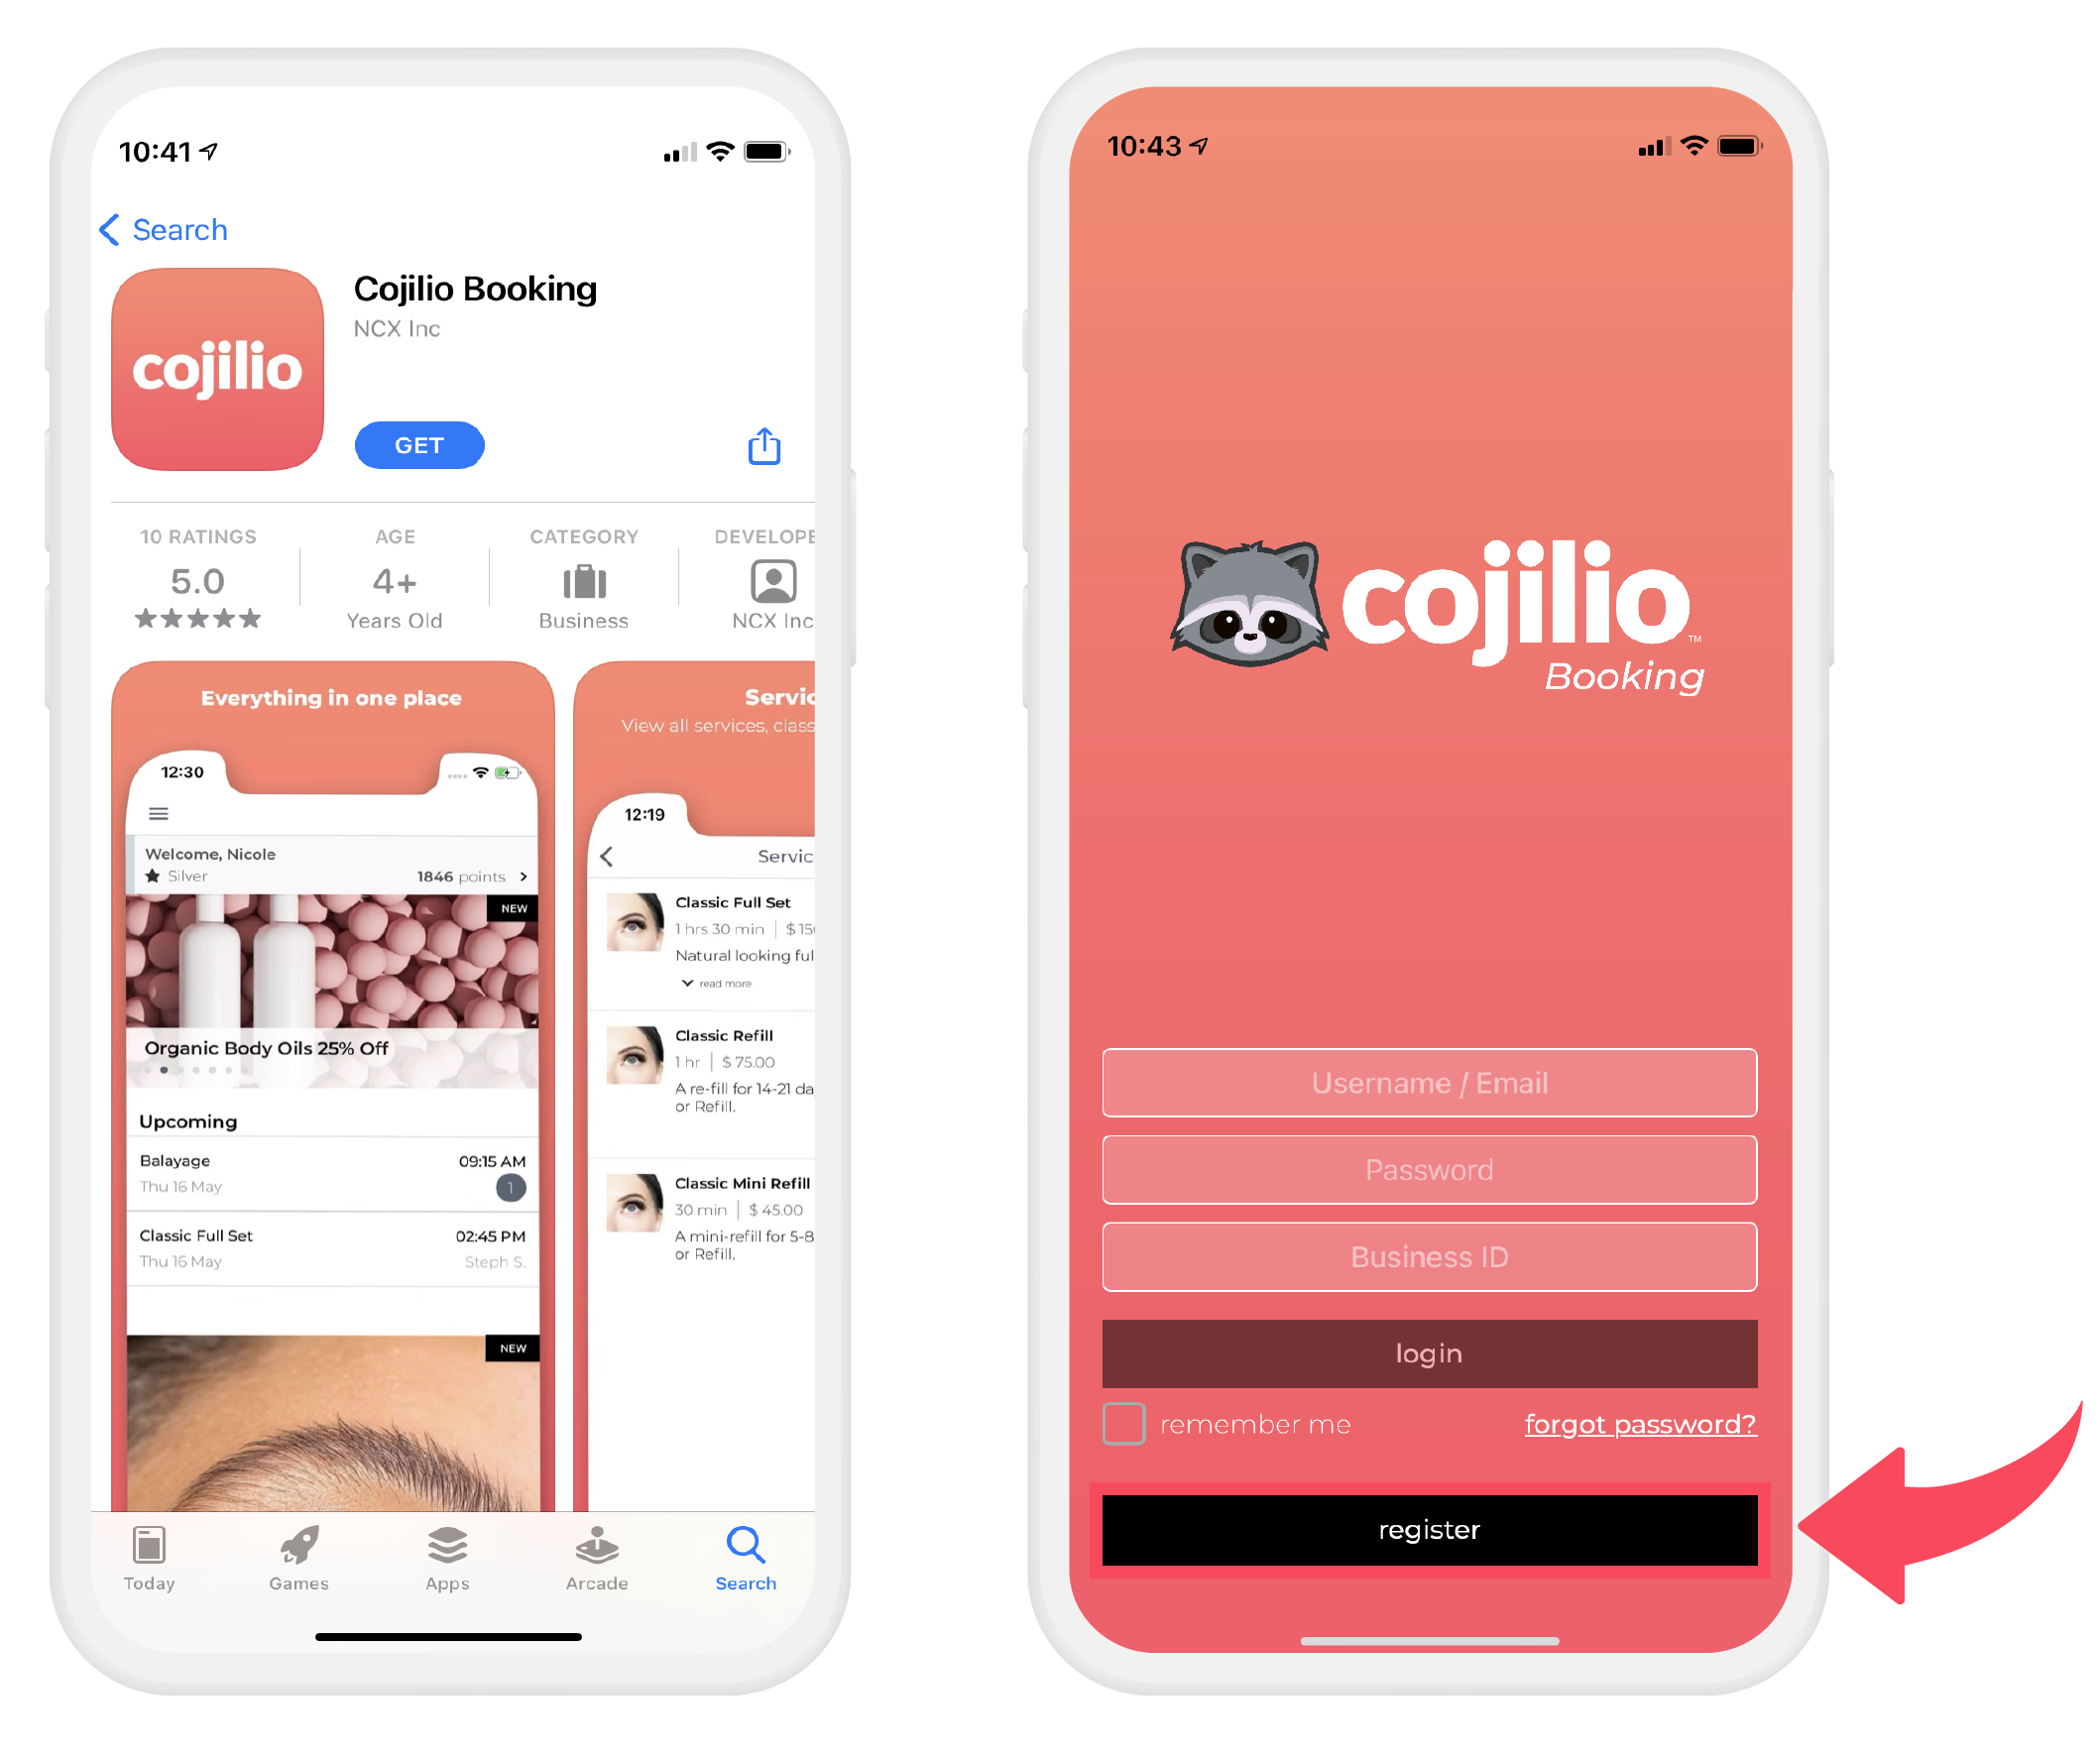 Download_the_Cojilio_Booking_App_and_Register_Zendesk_Guide.png